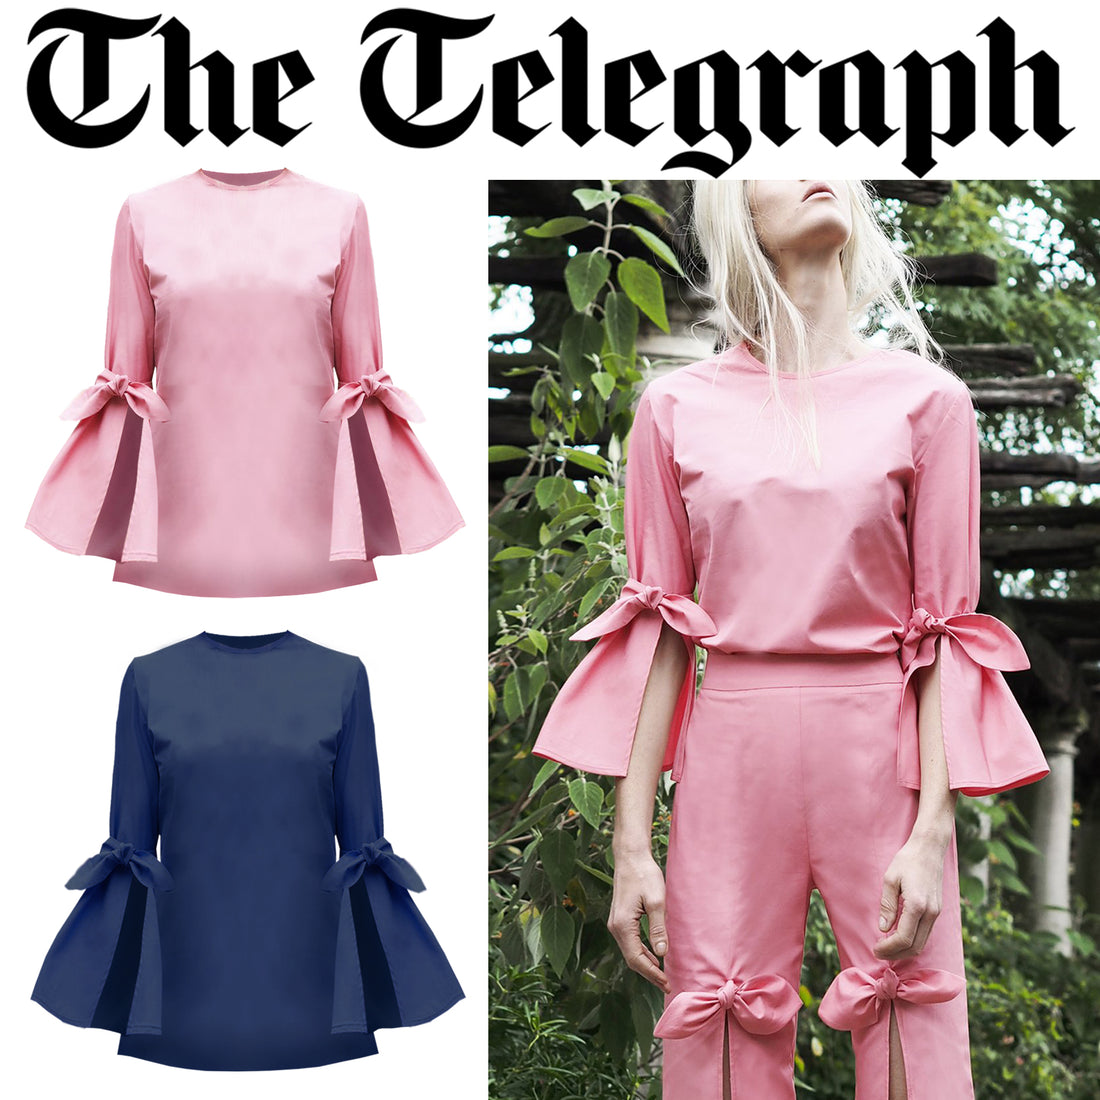 SS18 Palm Blouse featured by Telegraph.co.uk